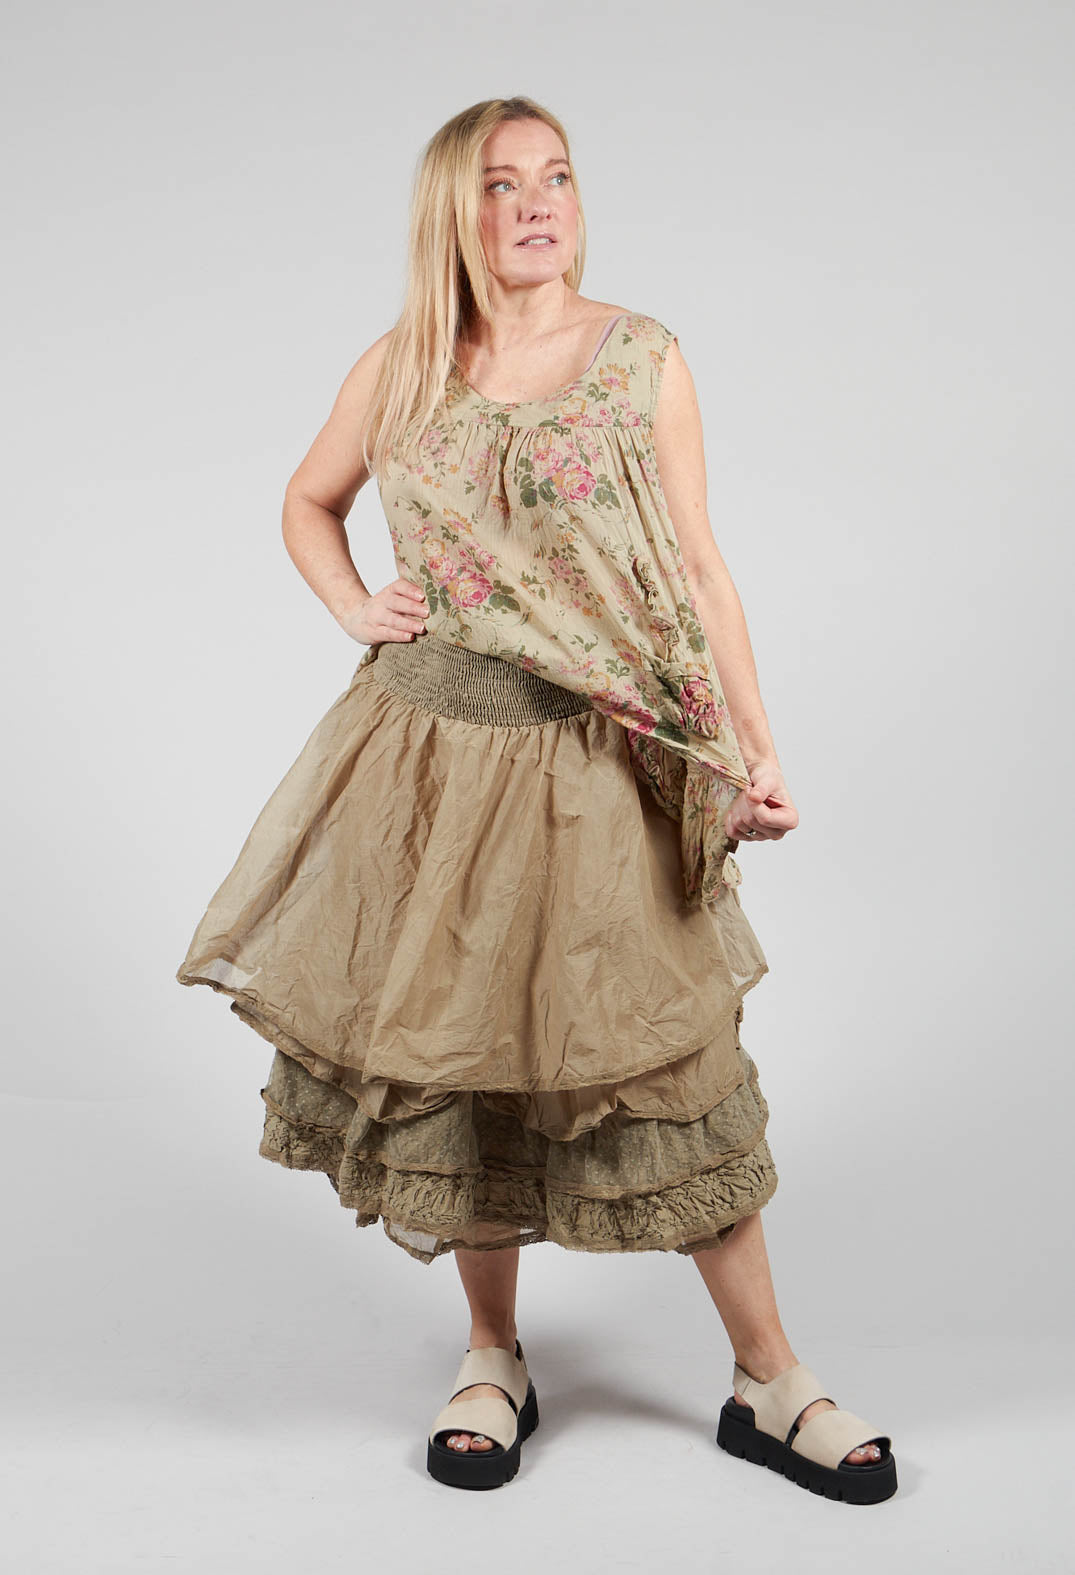 Madou Skirt in Almond